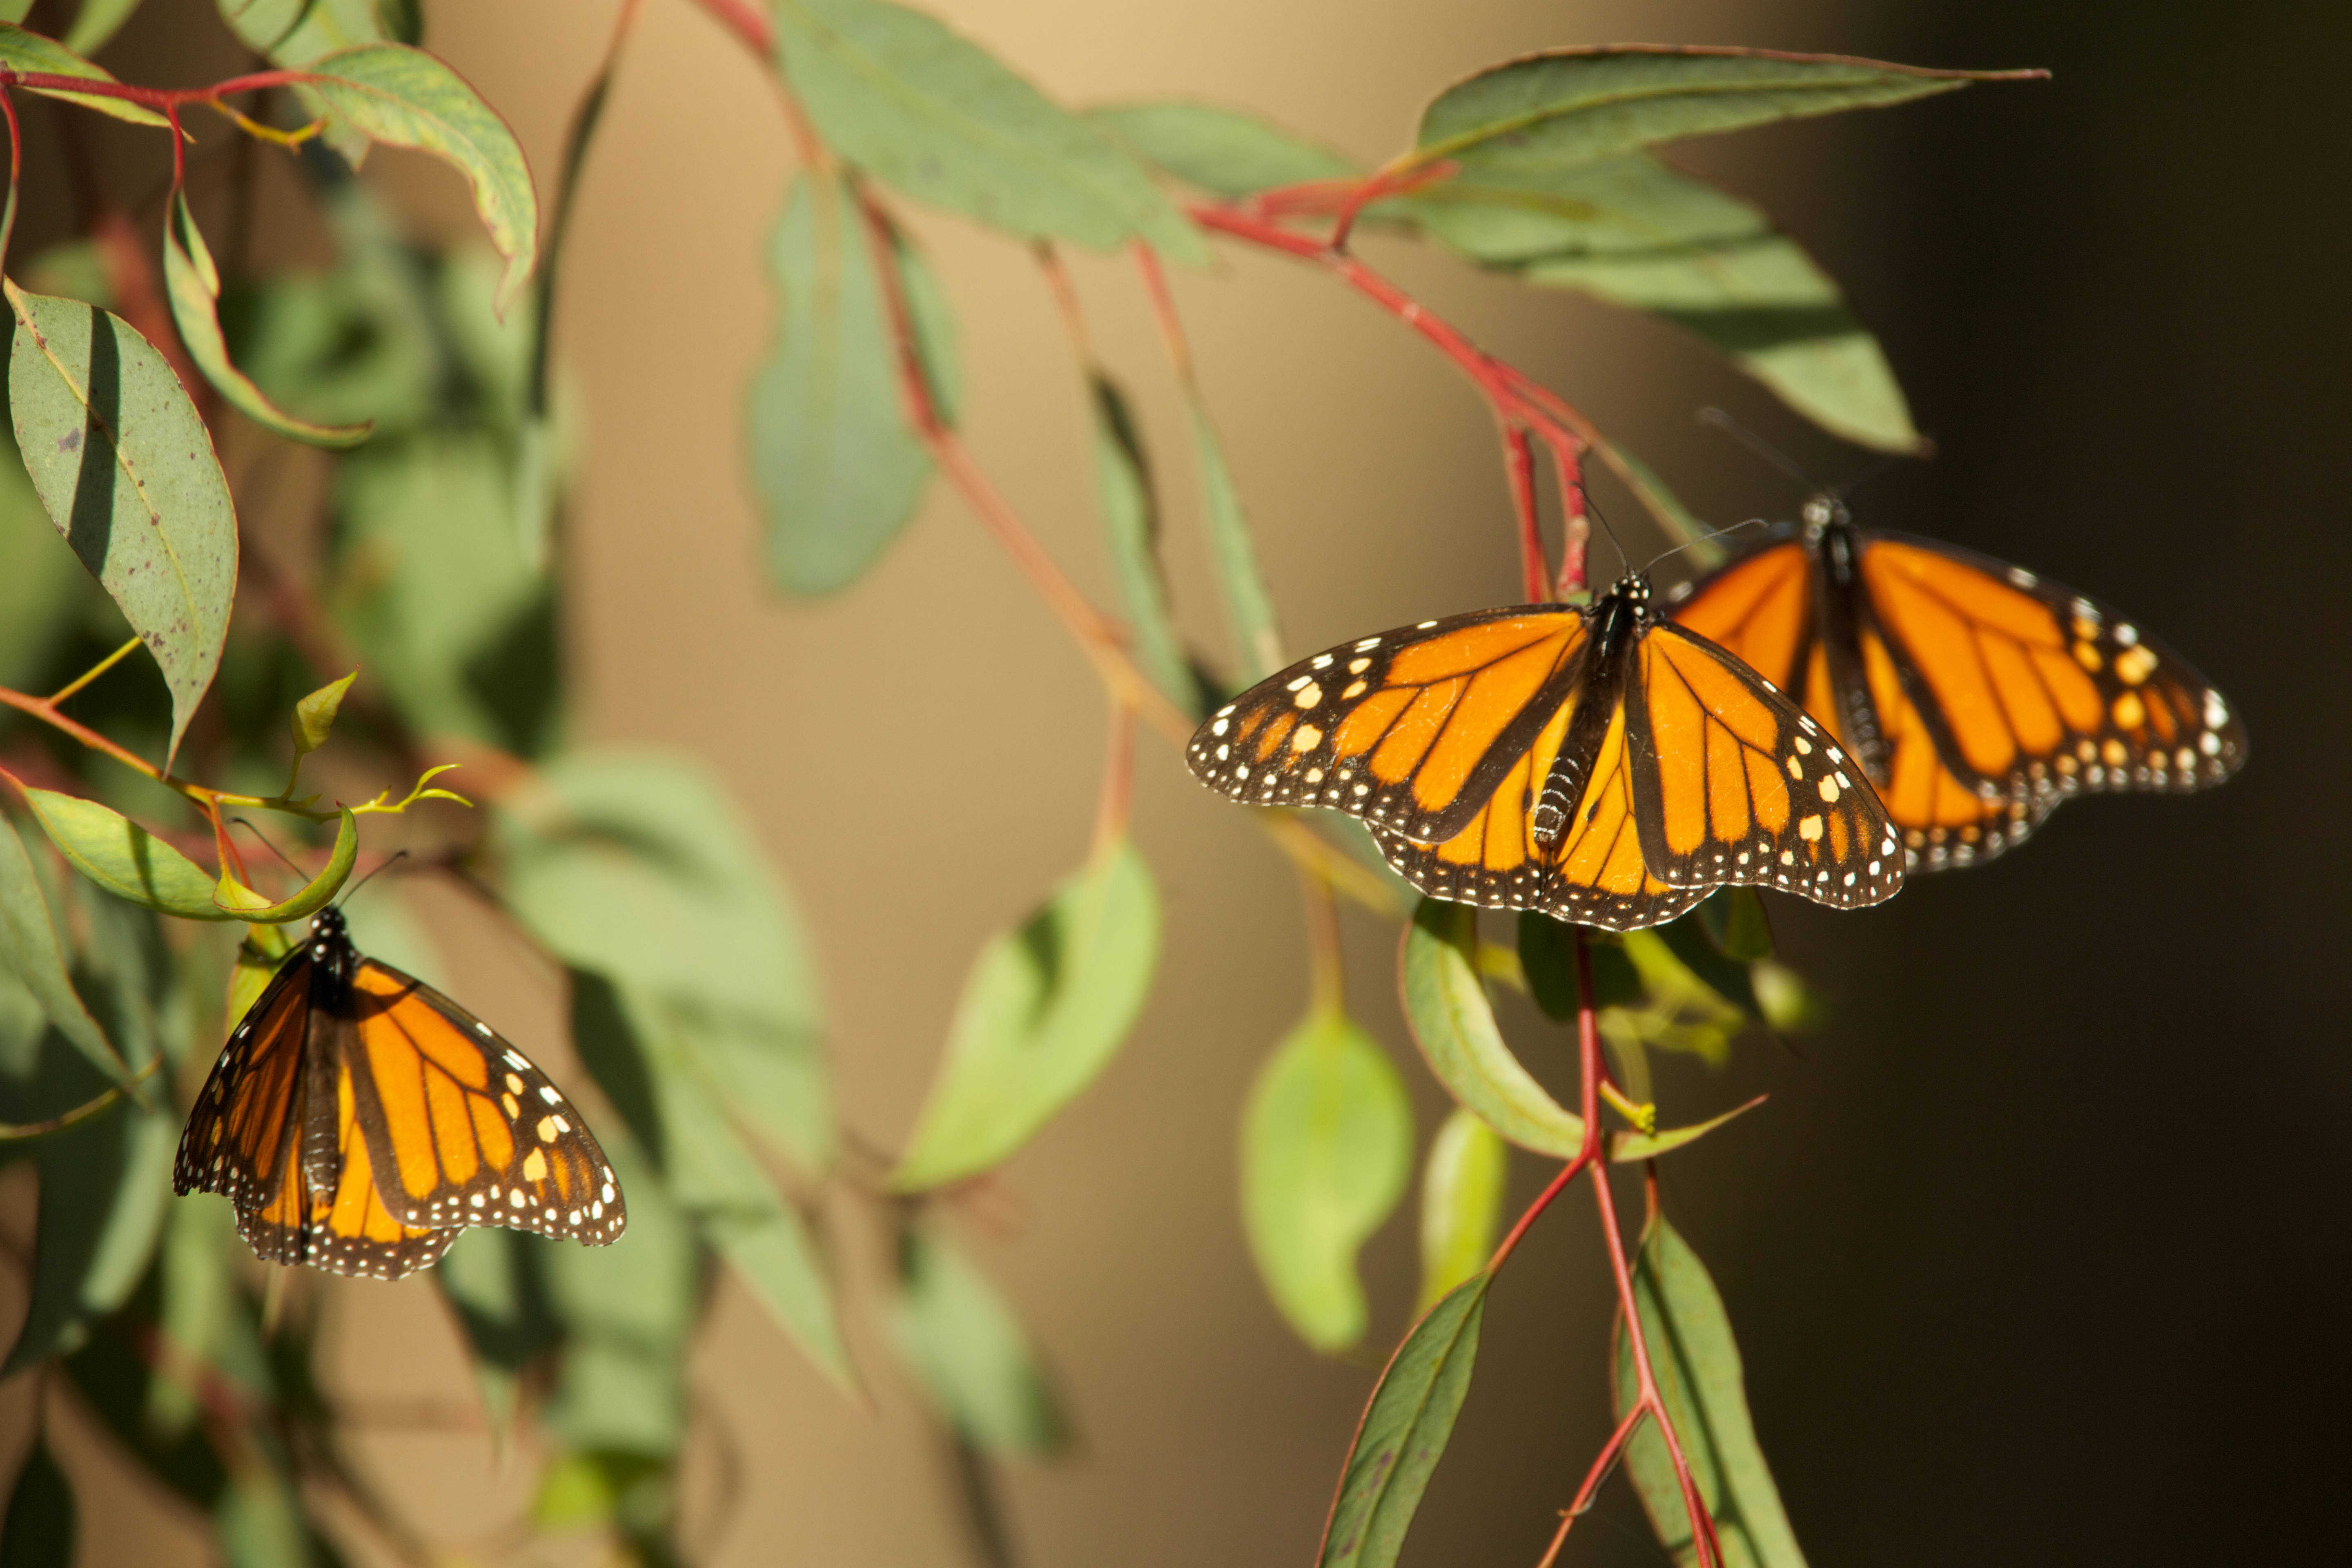 three monarch butterflies with open wings, perched on plant